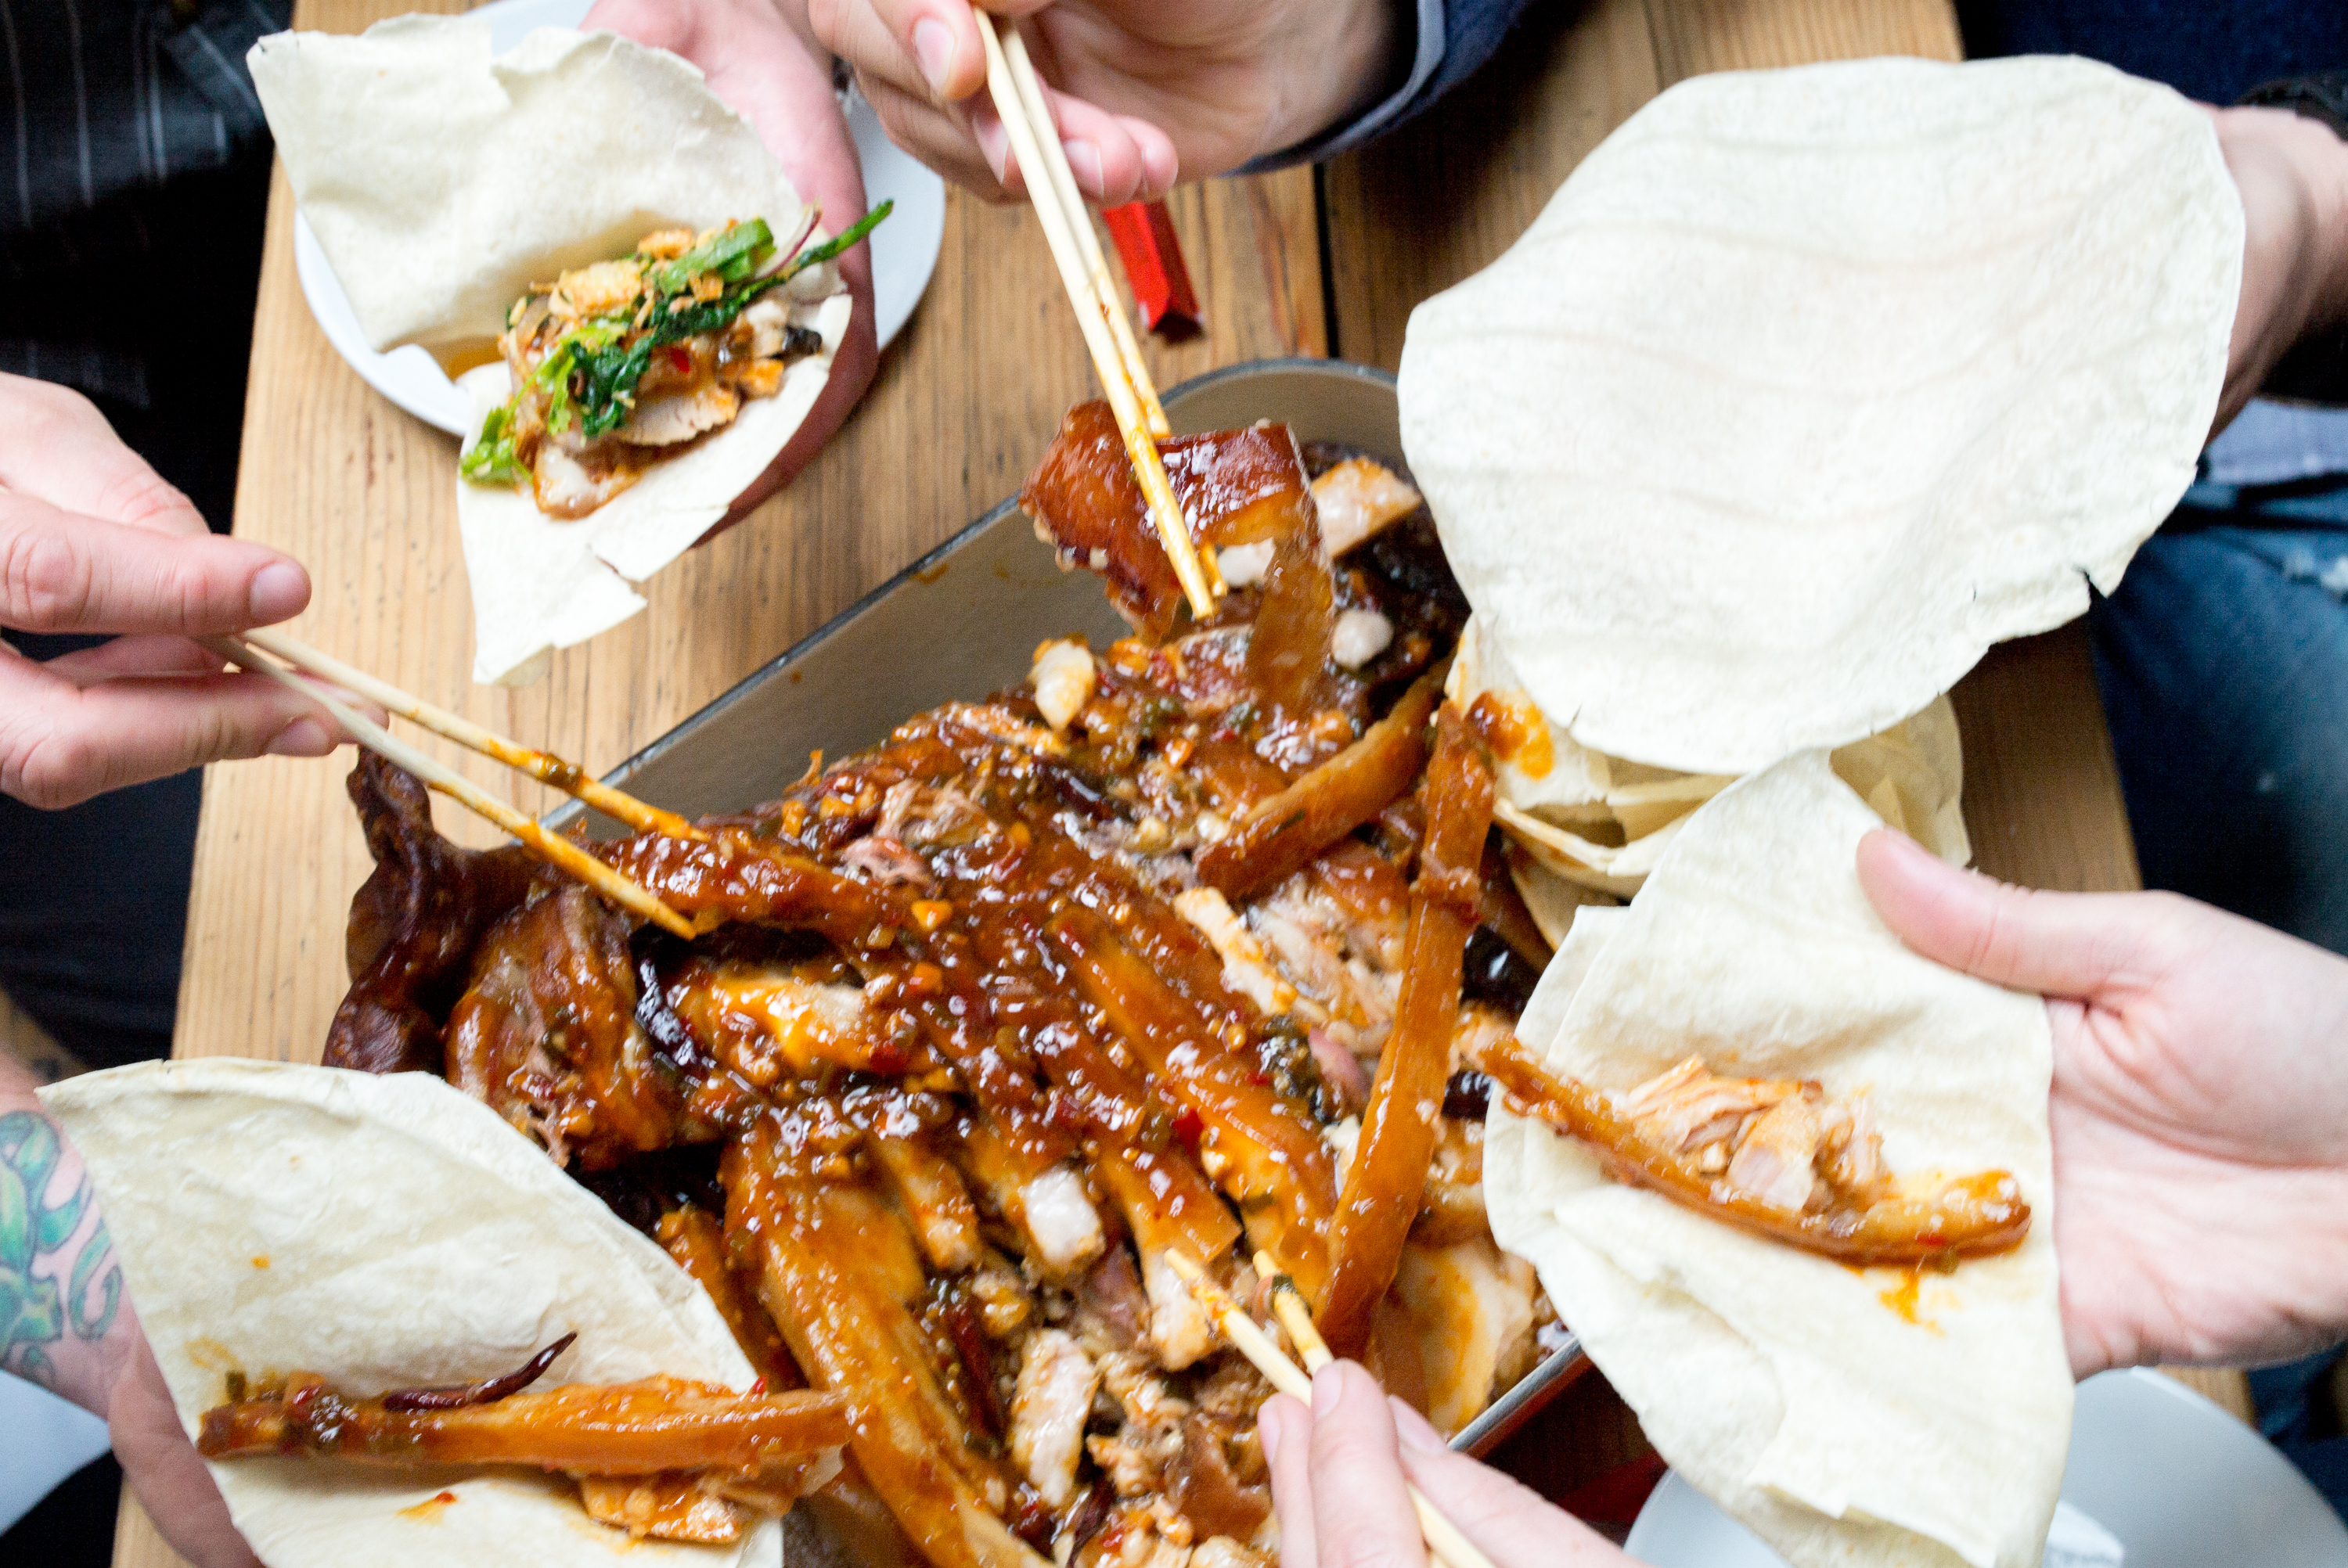 Several people digging into a roasted pig’s head with chop sticks